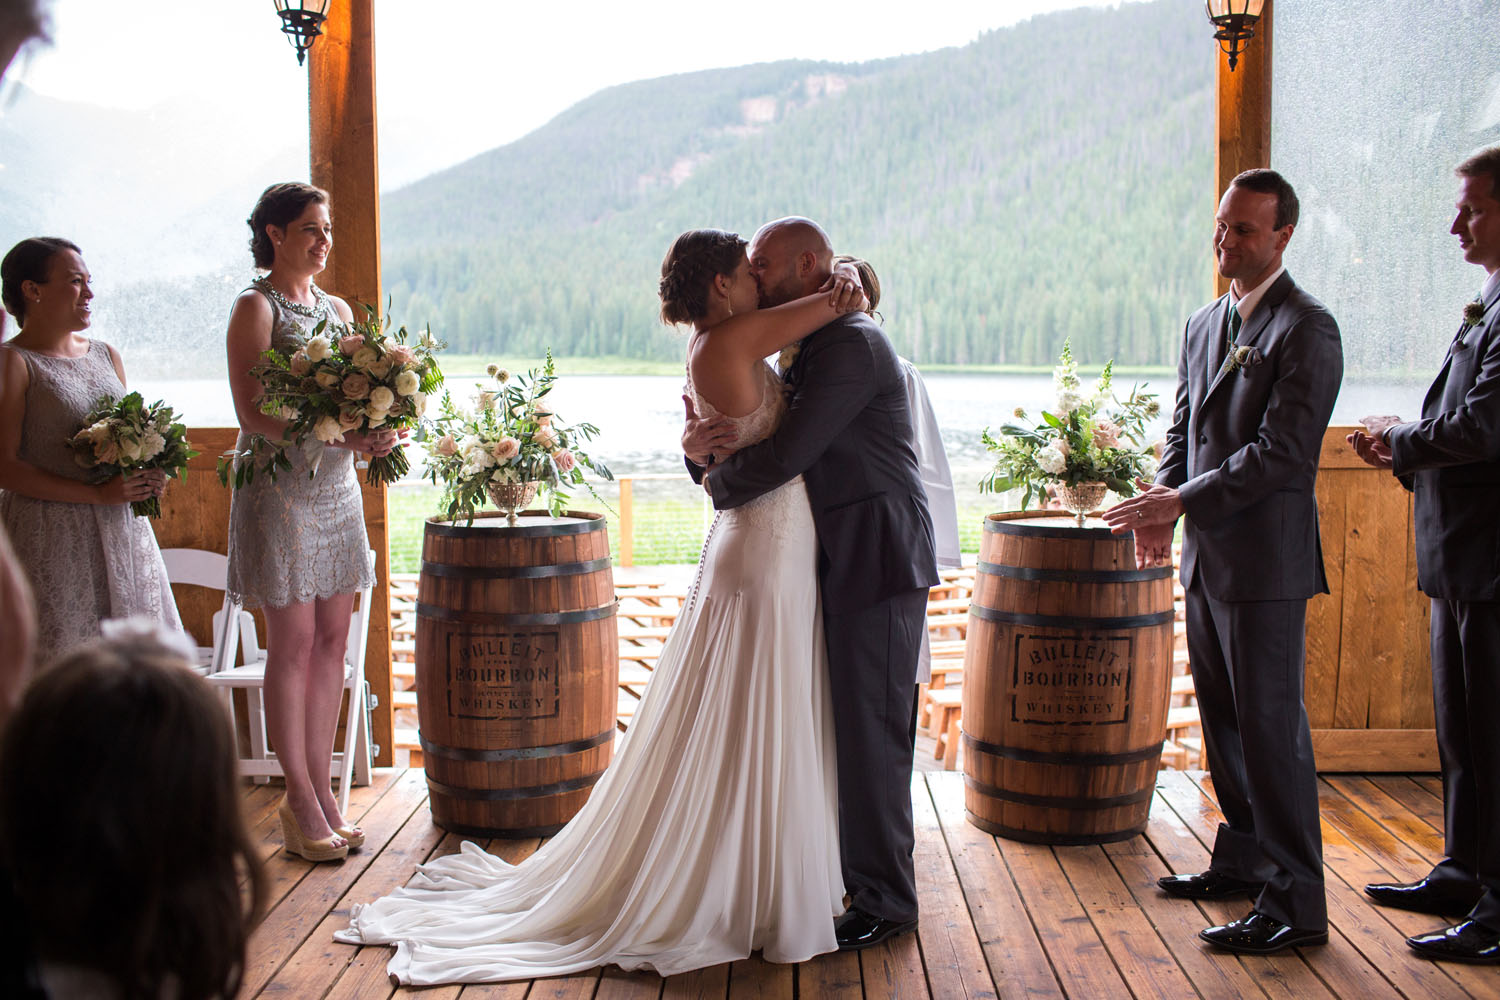 http://www.thestyledsoiree.com/ | Real wedding at piney river ranch | vail colorado wedding location